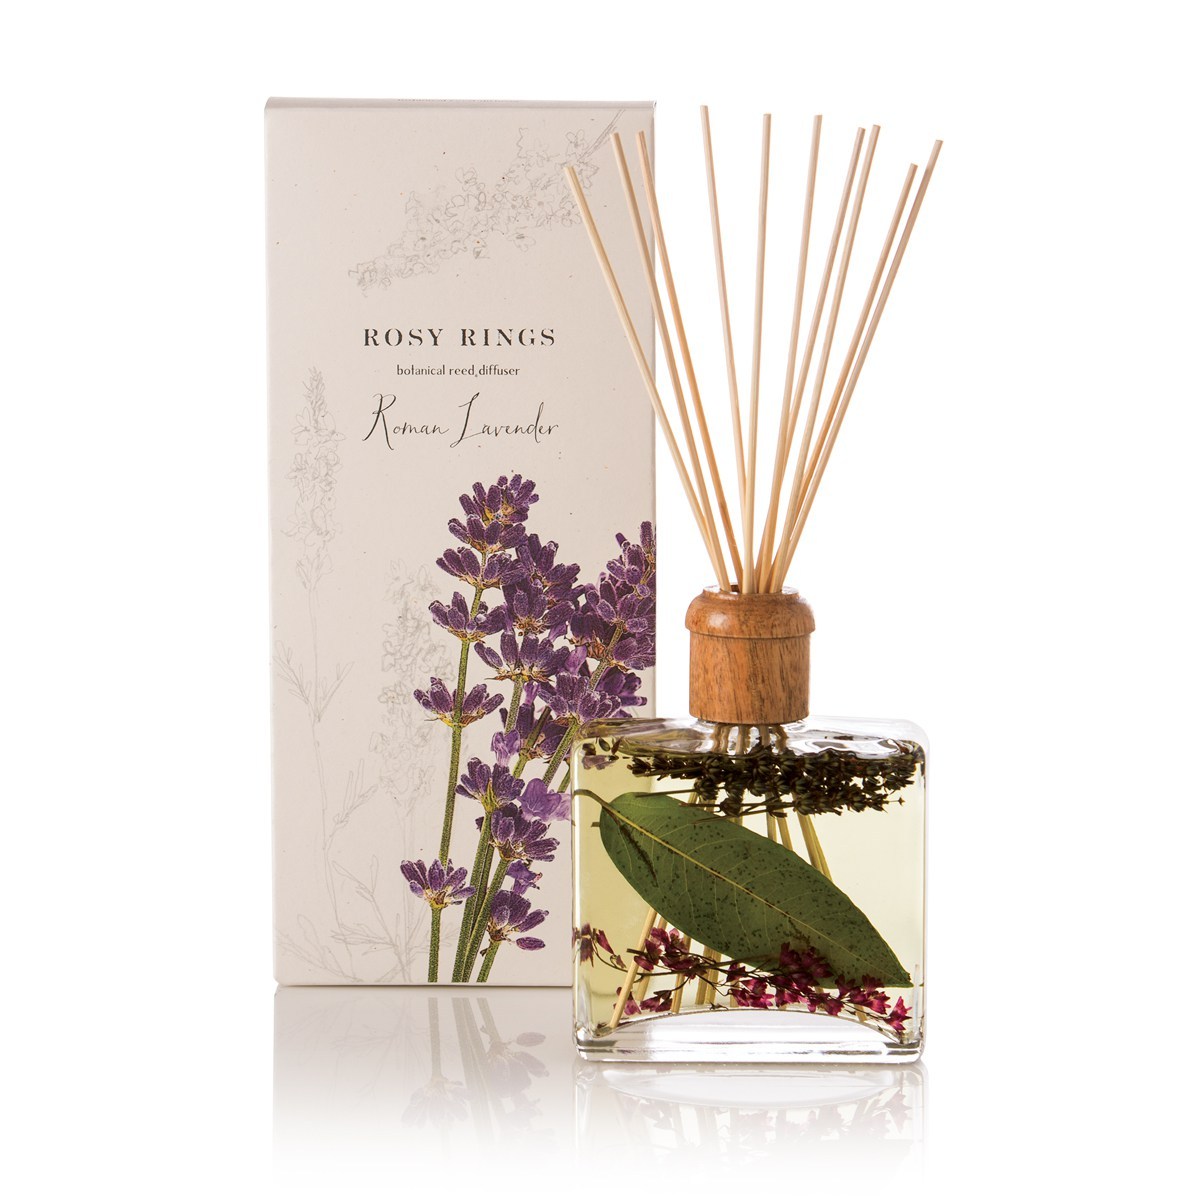 Rosy Rings Roman Lavender Reed Diffuser 13oz - $68.00